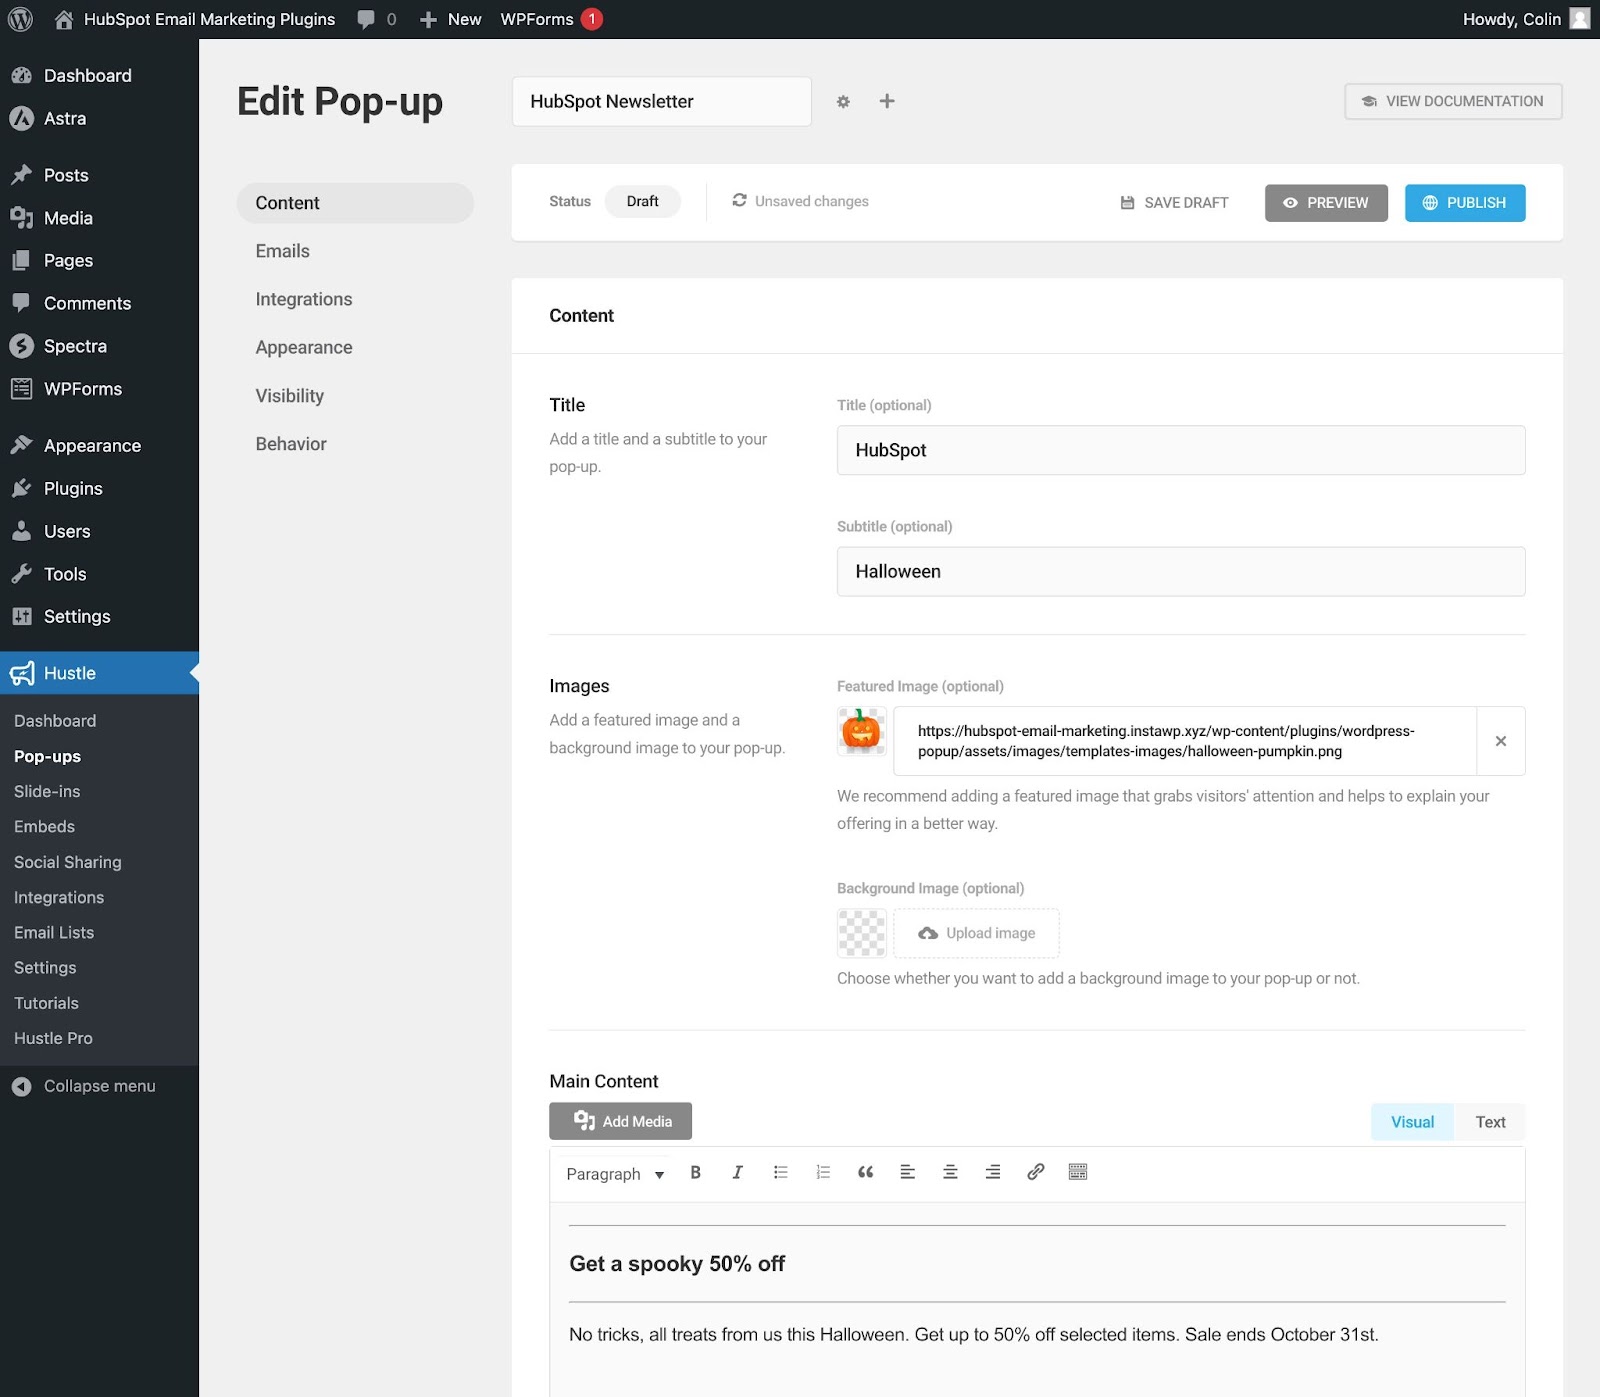 WordPress email marketing plugins, the Hustle template editor doesn't give you drag-and-drop control